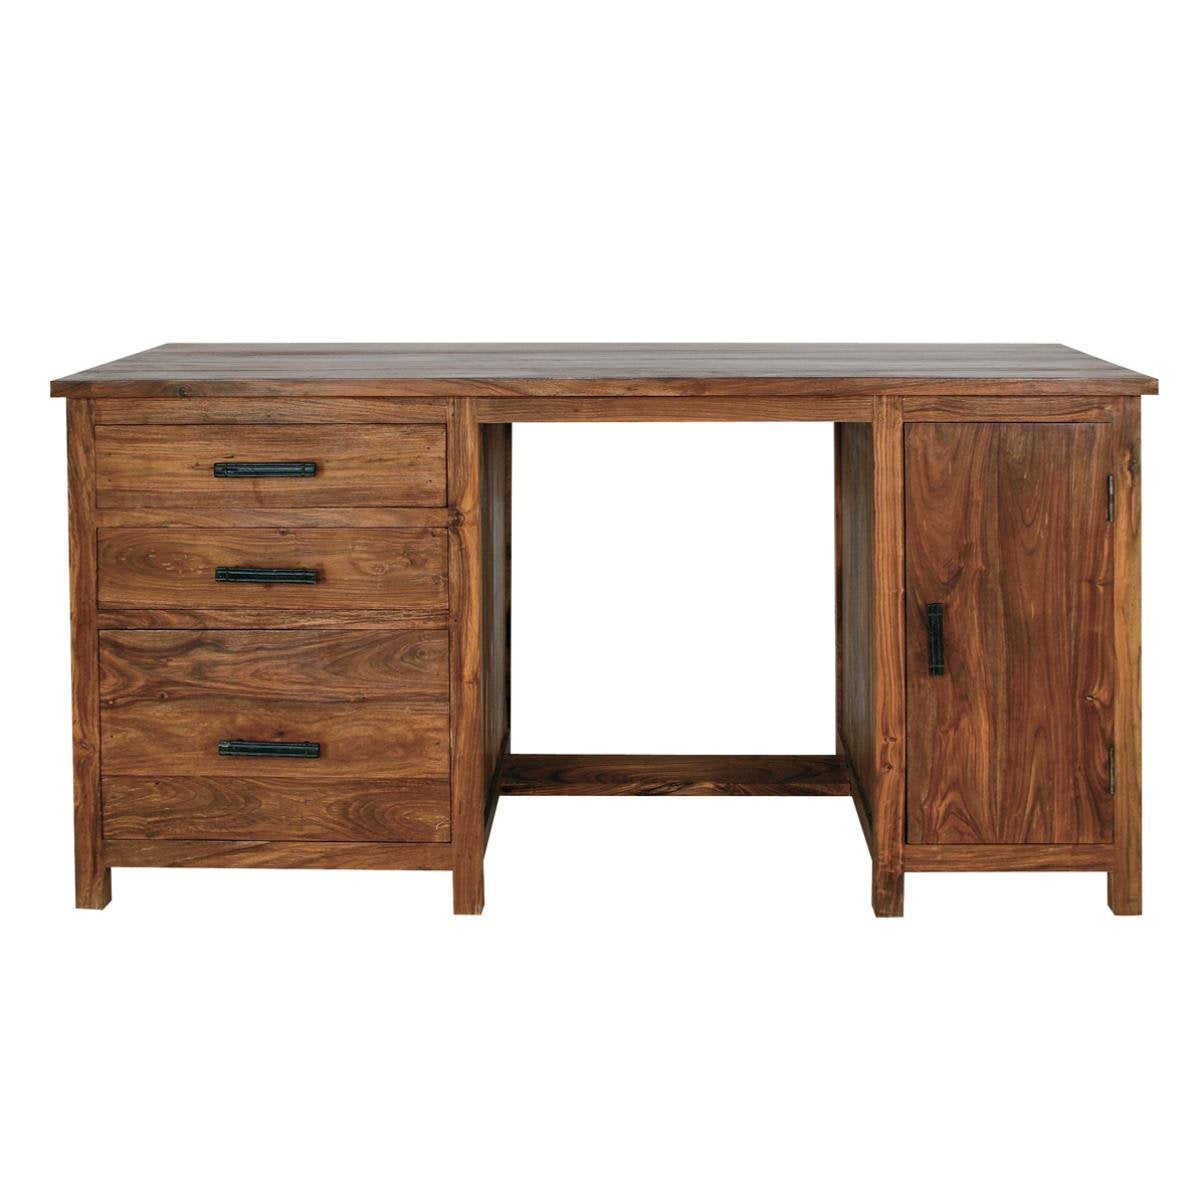 Wooden Study Table - Gladiolus Collection